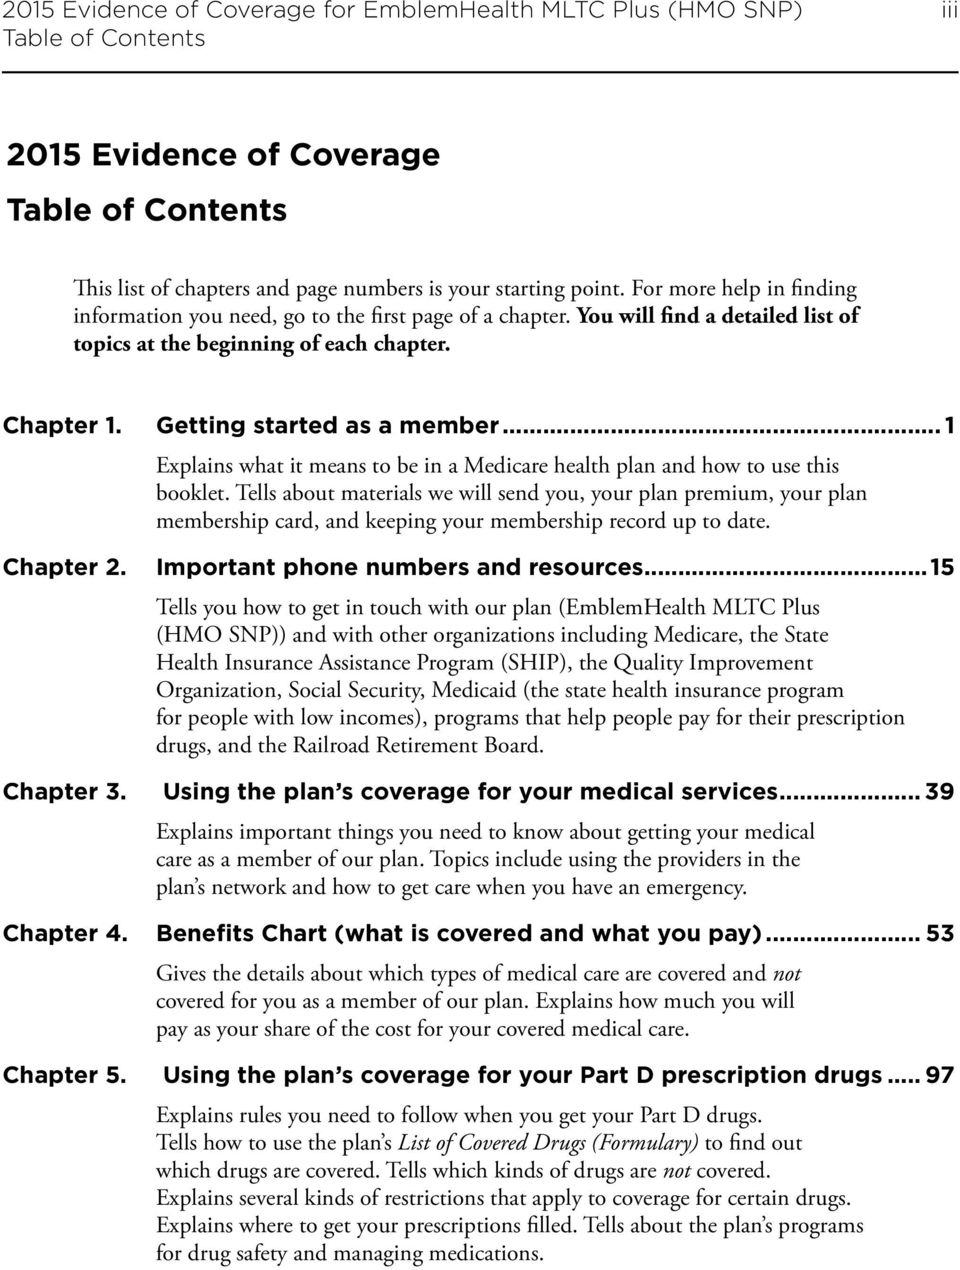 .. 1 Explains what it means to be in a Medicare health plan and how to use this booklet.